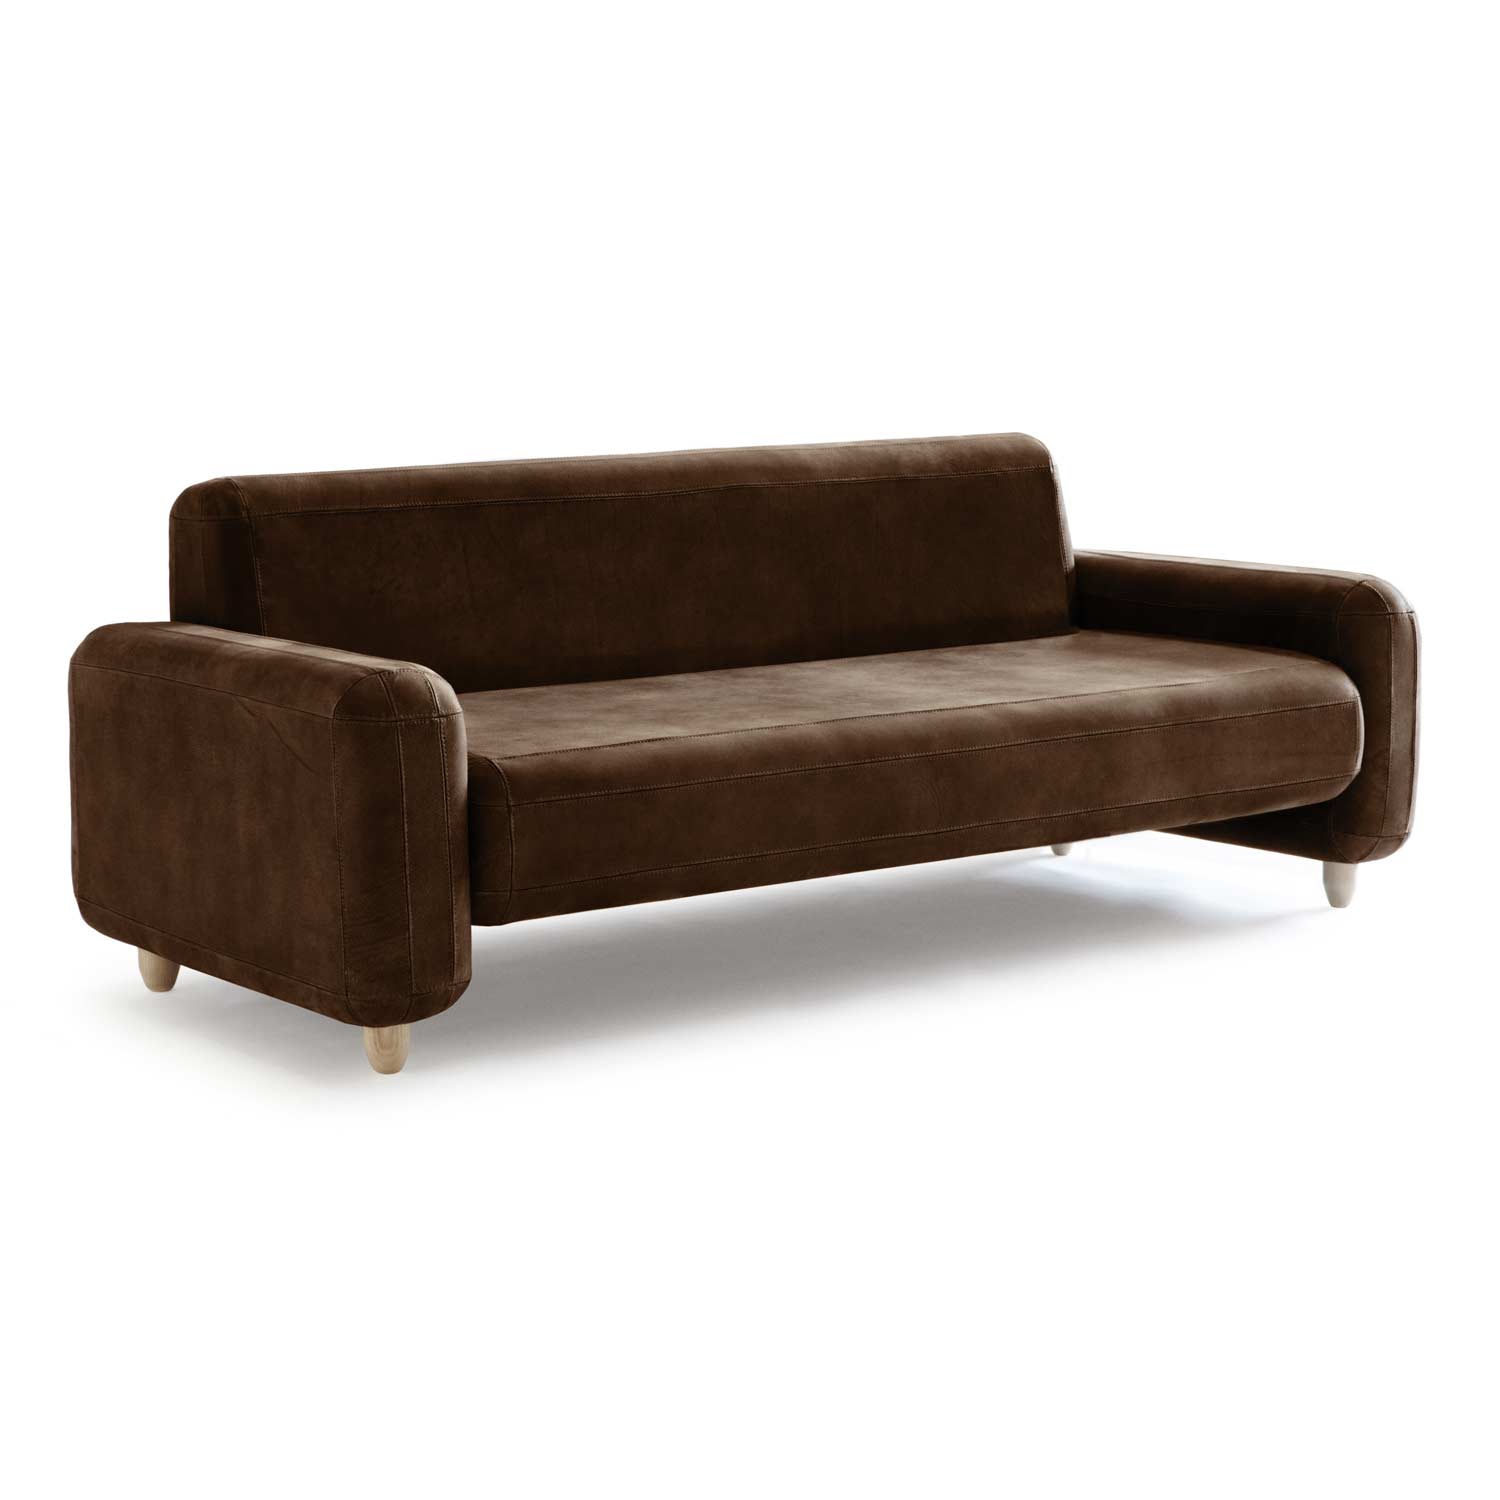 Sustainable Living in a Compact Form, chocolate brown leather sofa